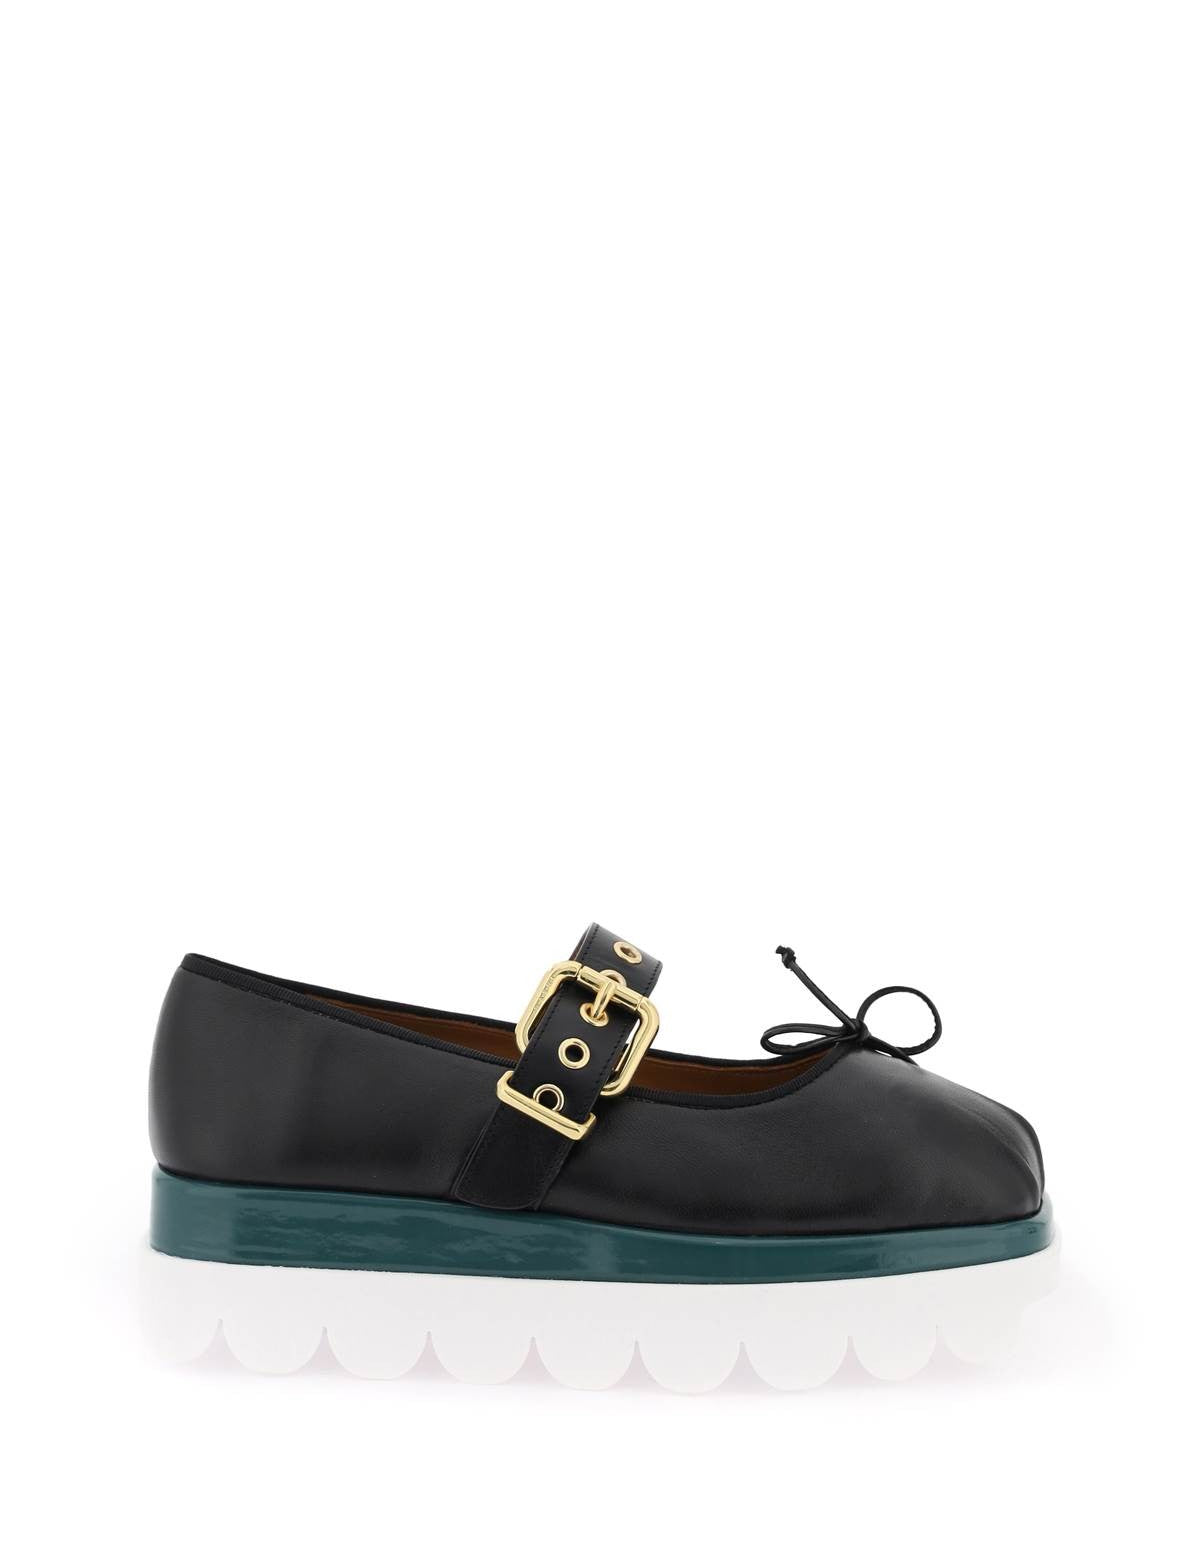 marni-nappa-leather-mary-jane-with-notched-sole.jpg